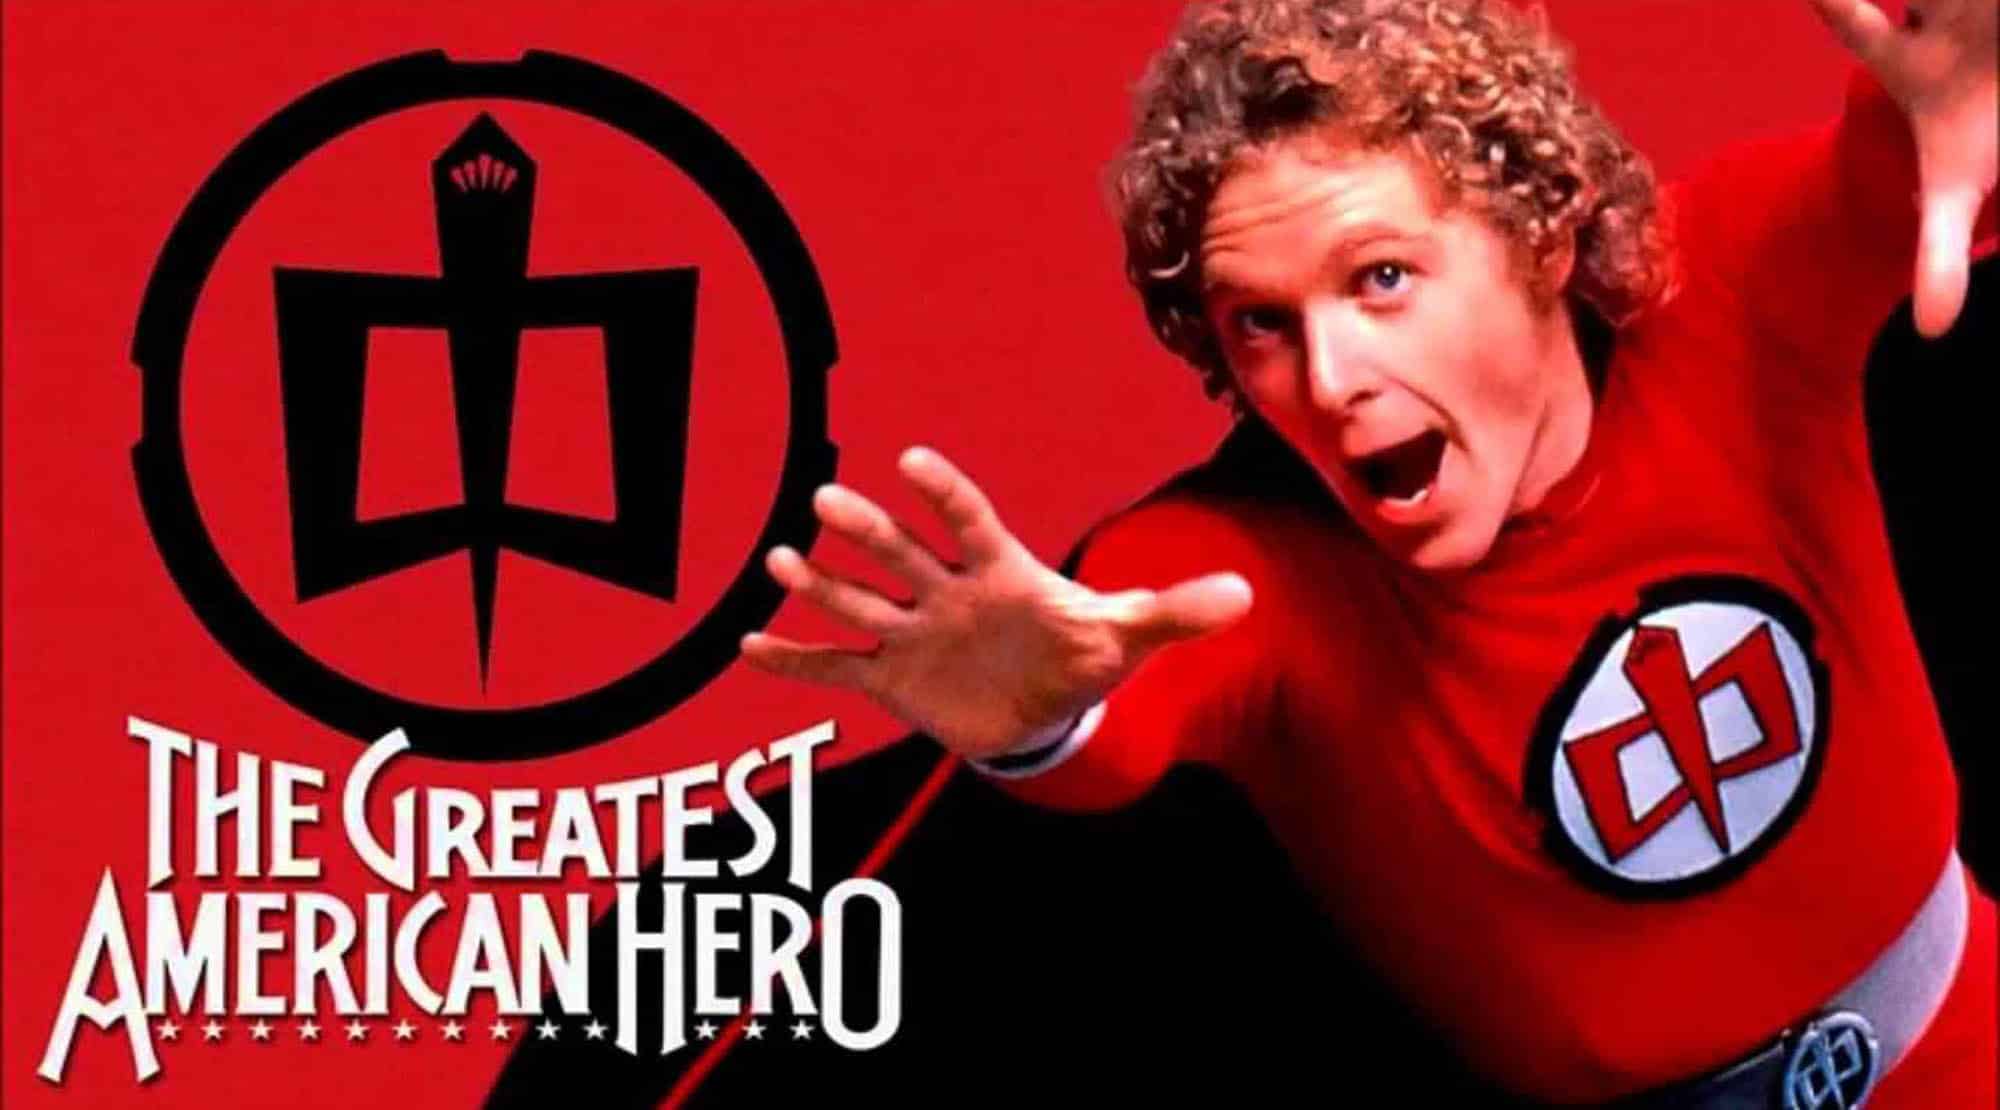 The Greatest American Hero tv show from the 80's. We hope the song is now ringing in your head and reminds you of the greatest web design agency. (haha)